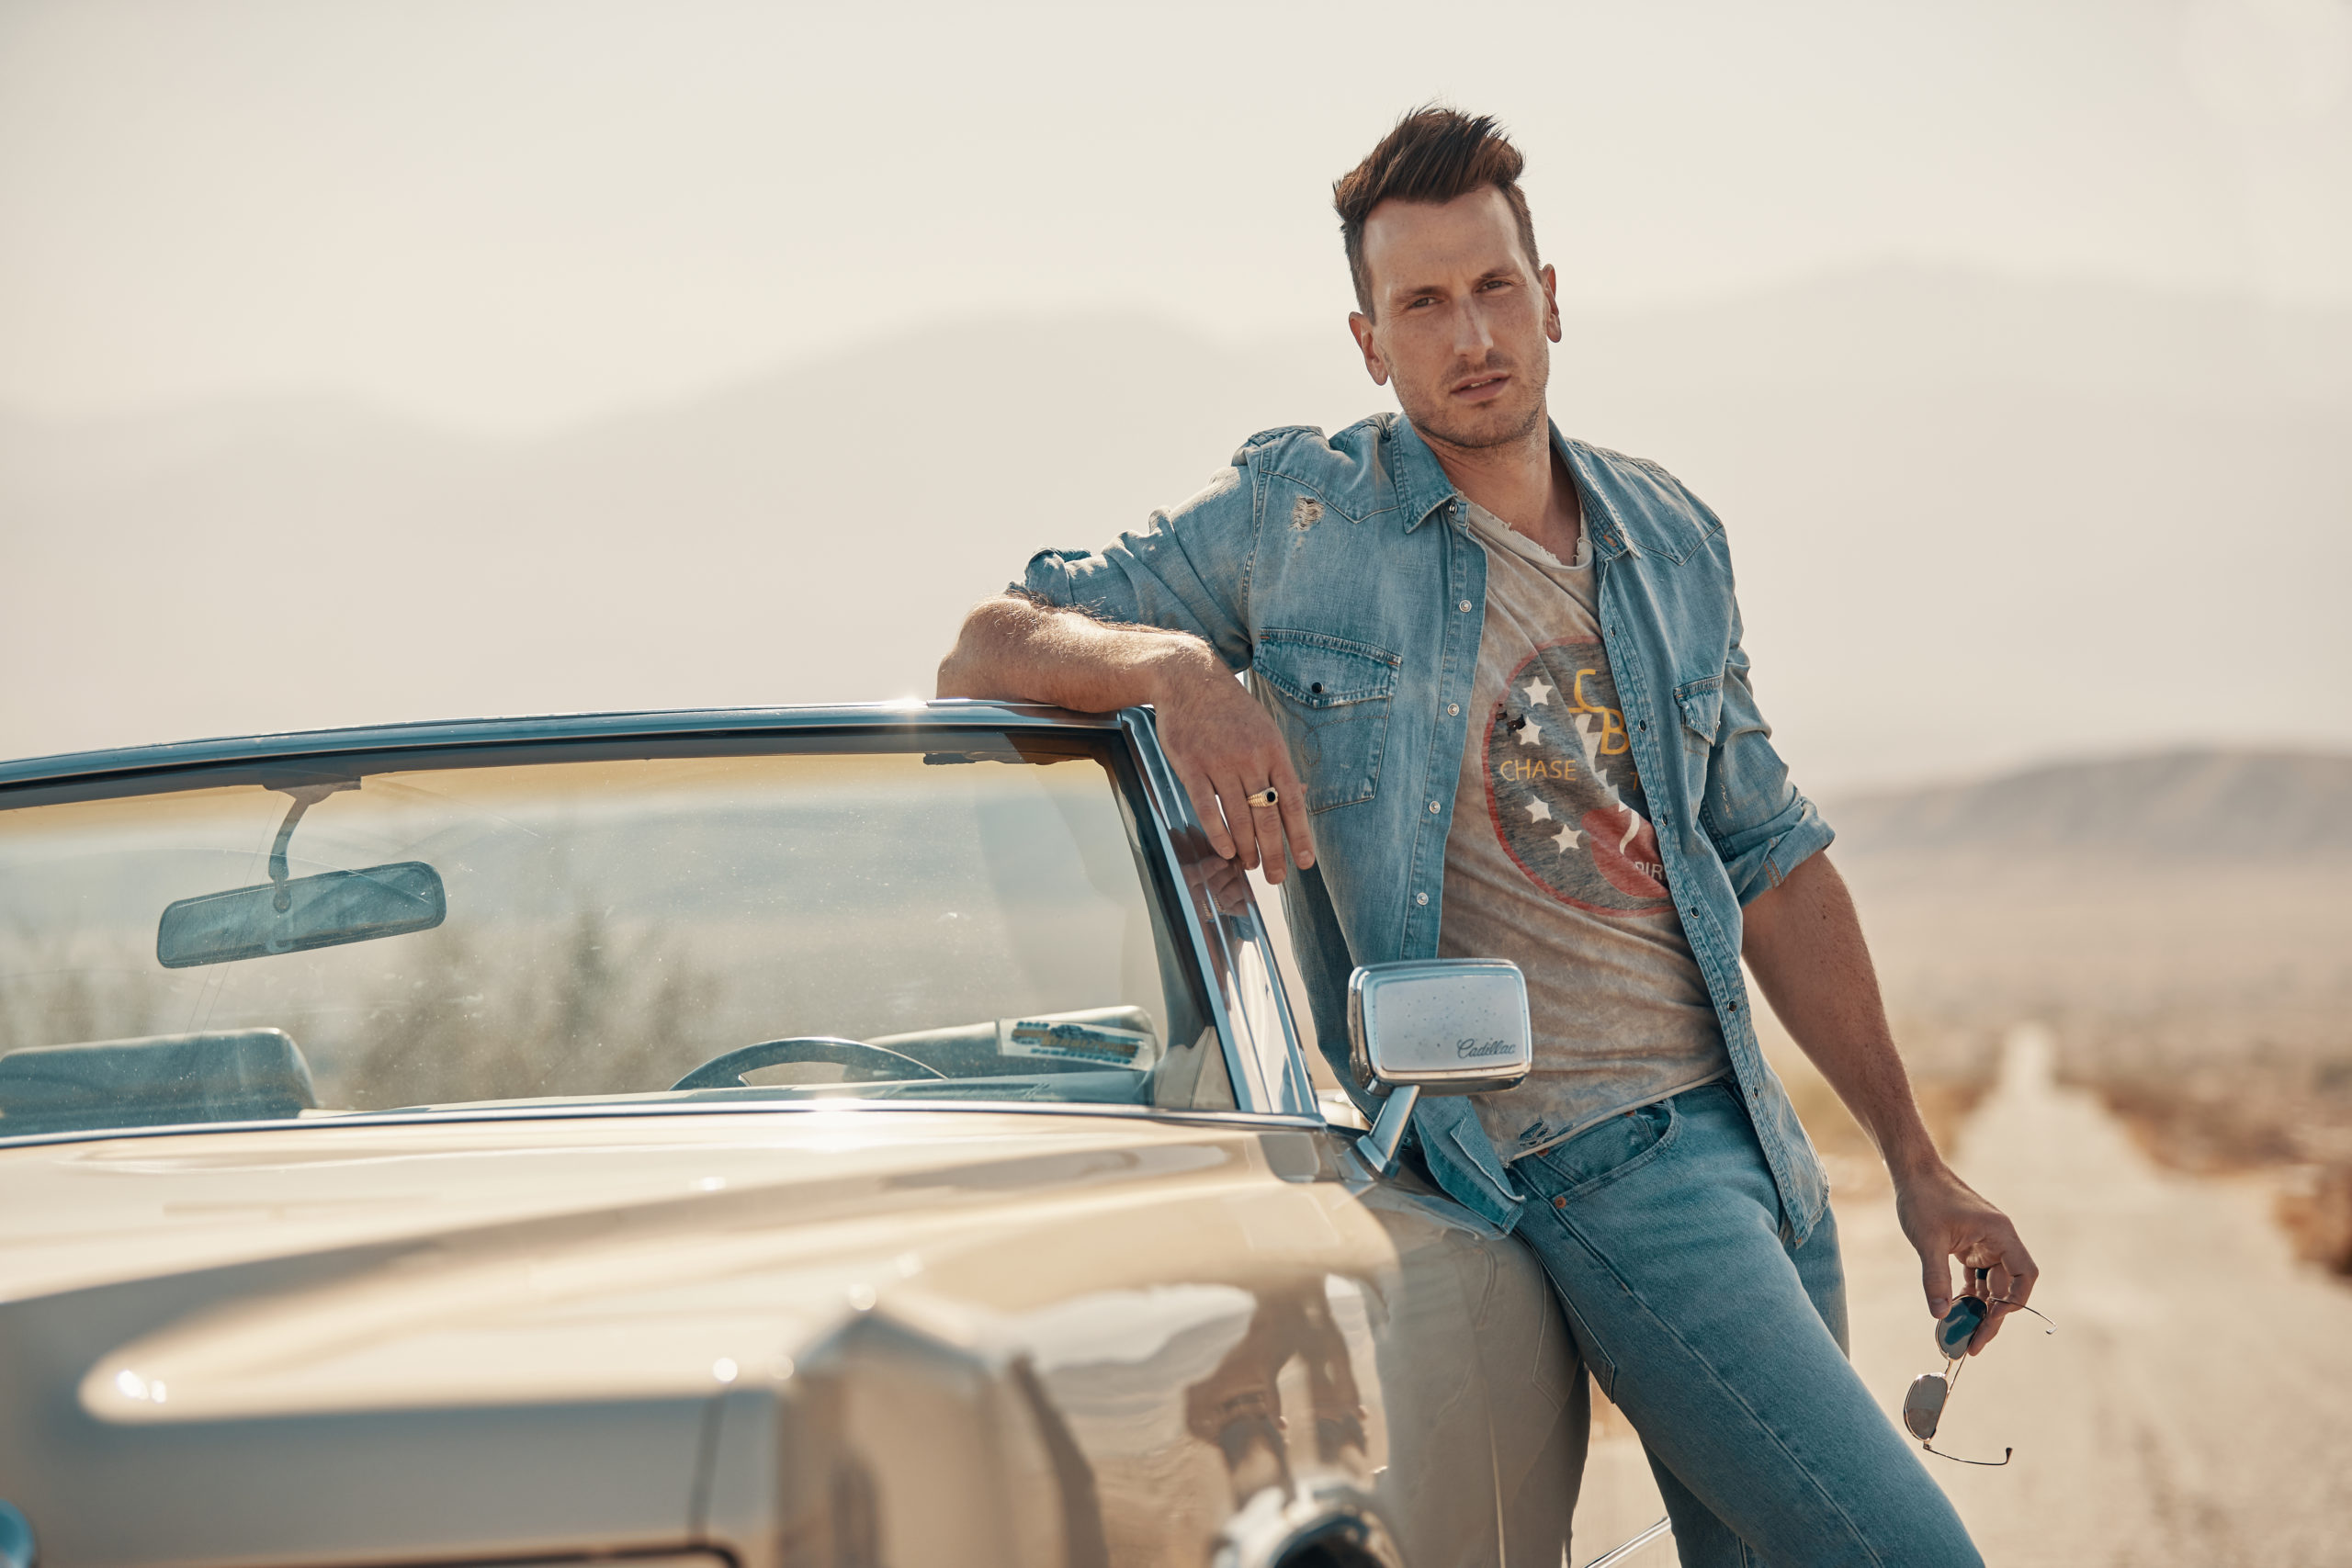 Russell Dickerson Drops Music Video for “Love You Like I Used To” – Watch